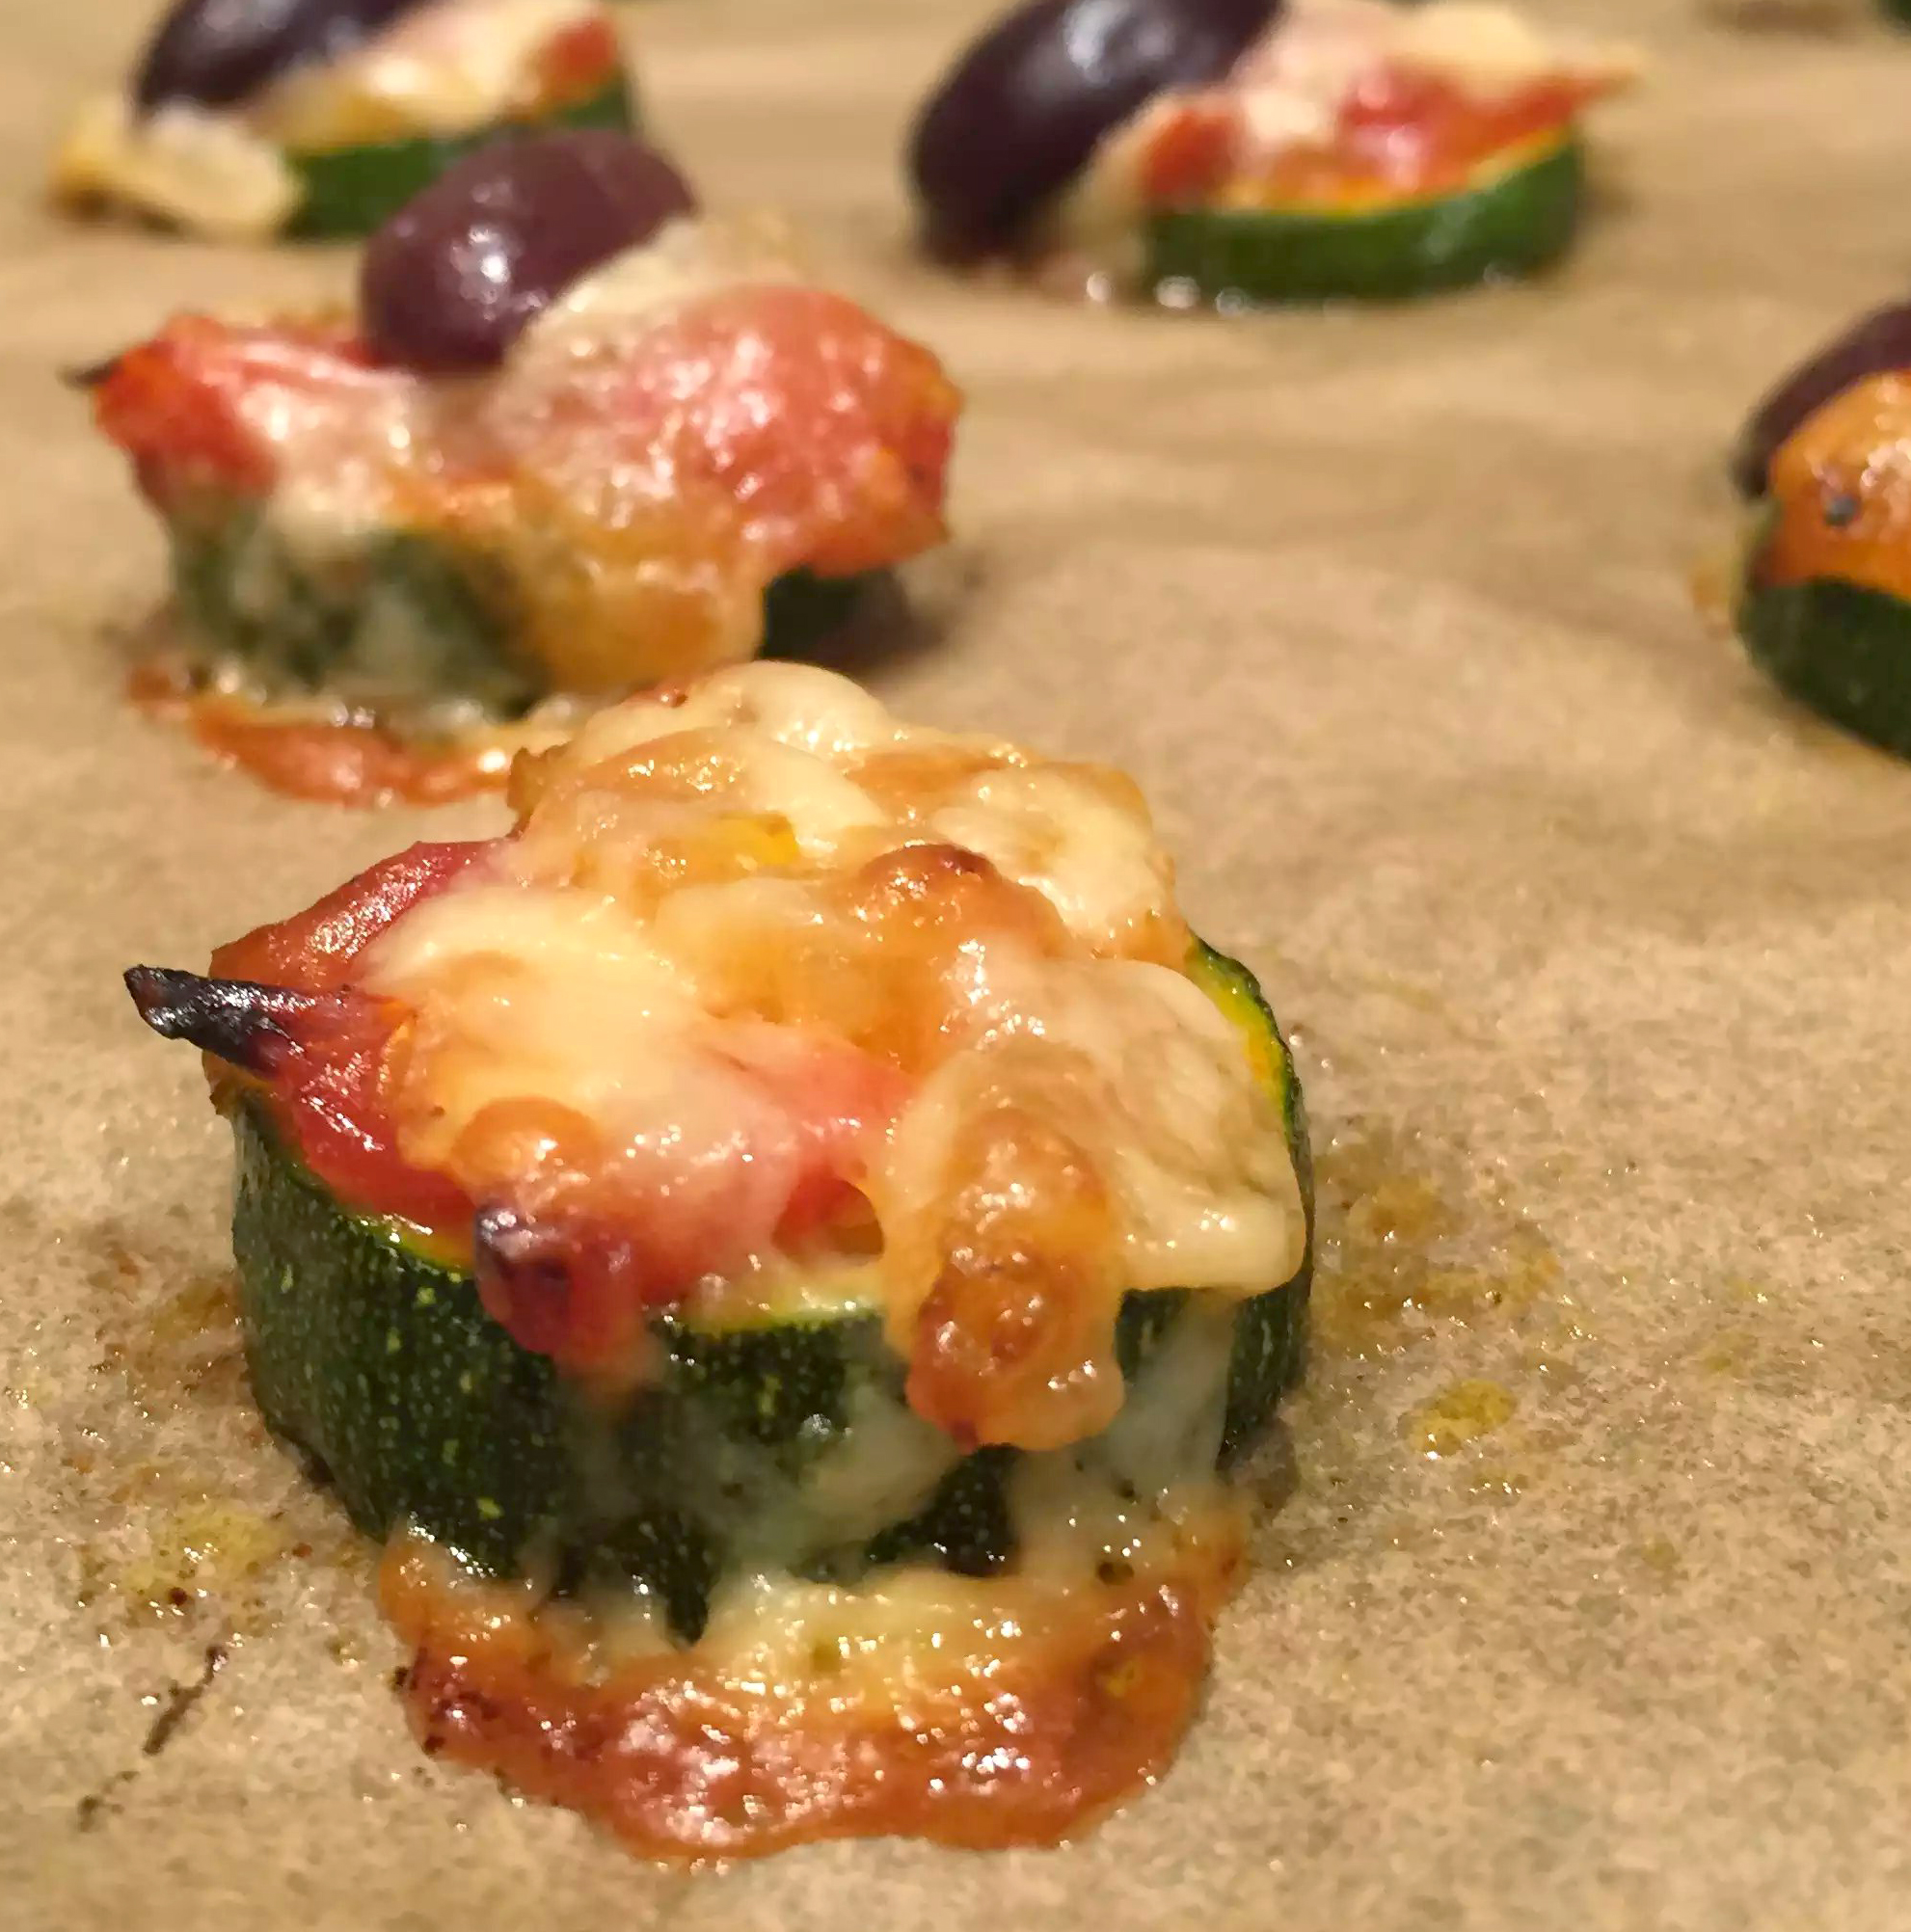 Courgette Pizza Bites Cheese Tomato Olive Appetiser - SCD Paleo Clean Eating, Grain-Free Gluten-Free